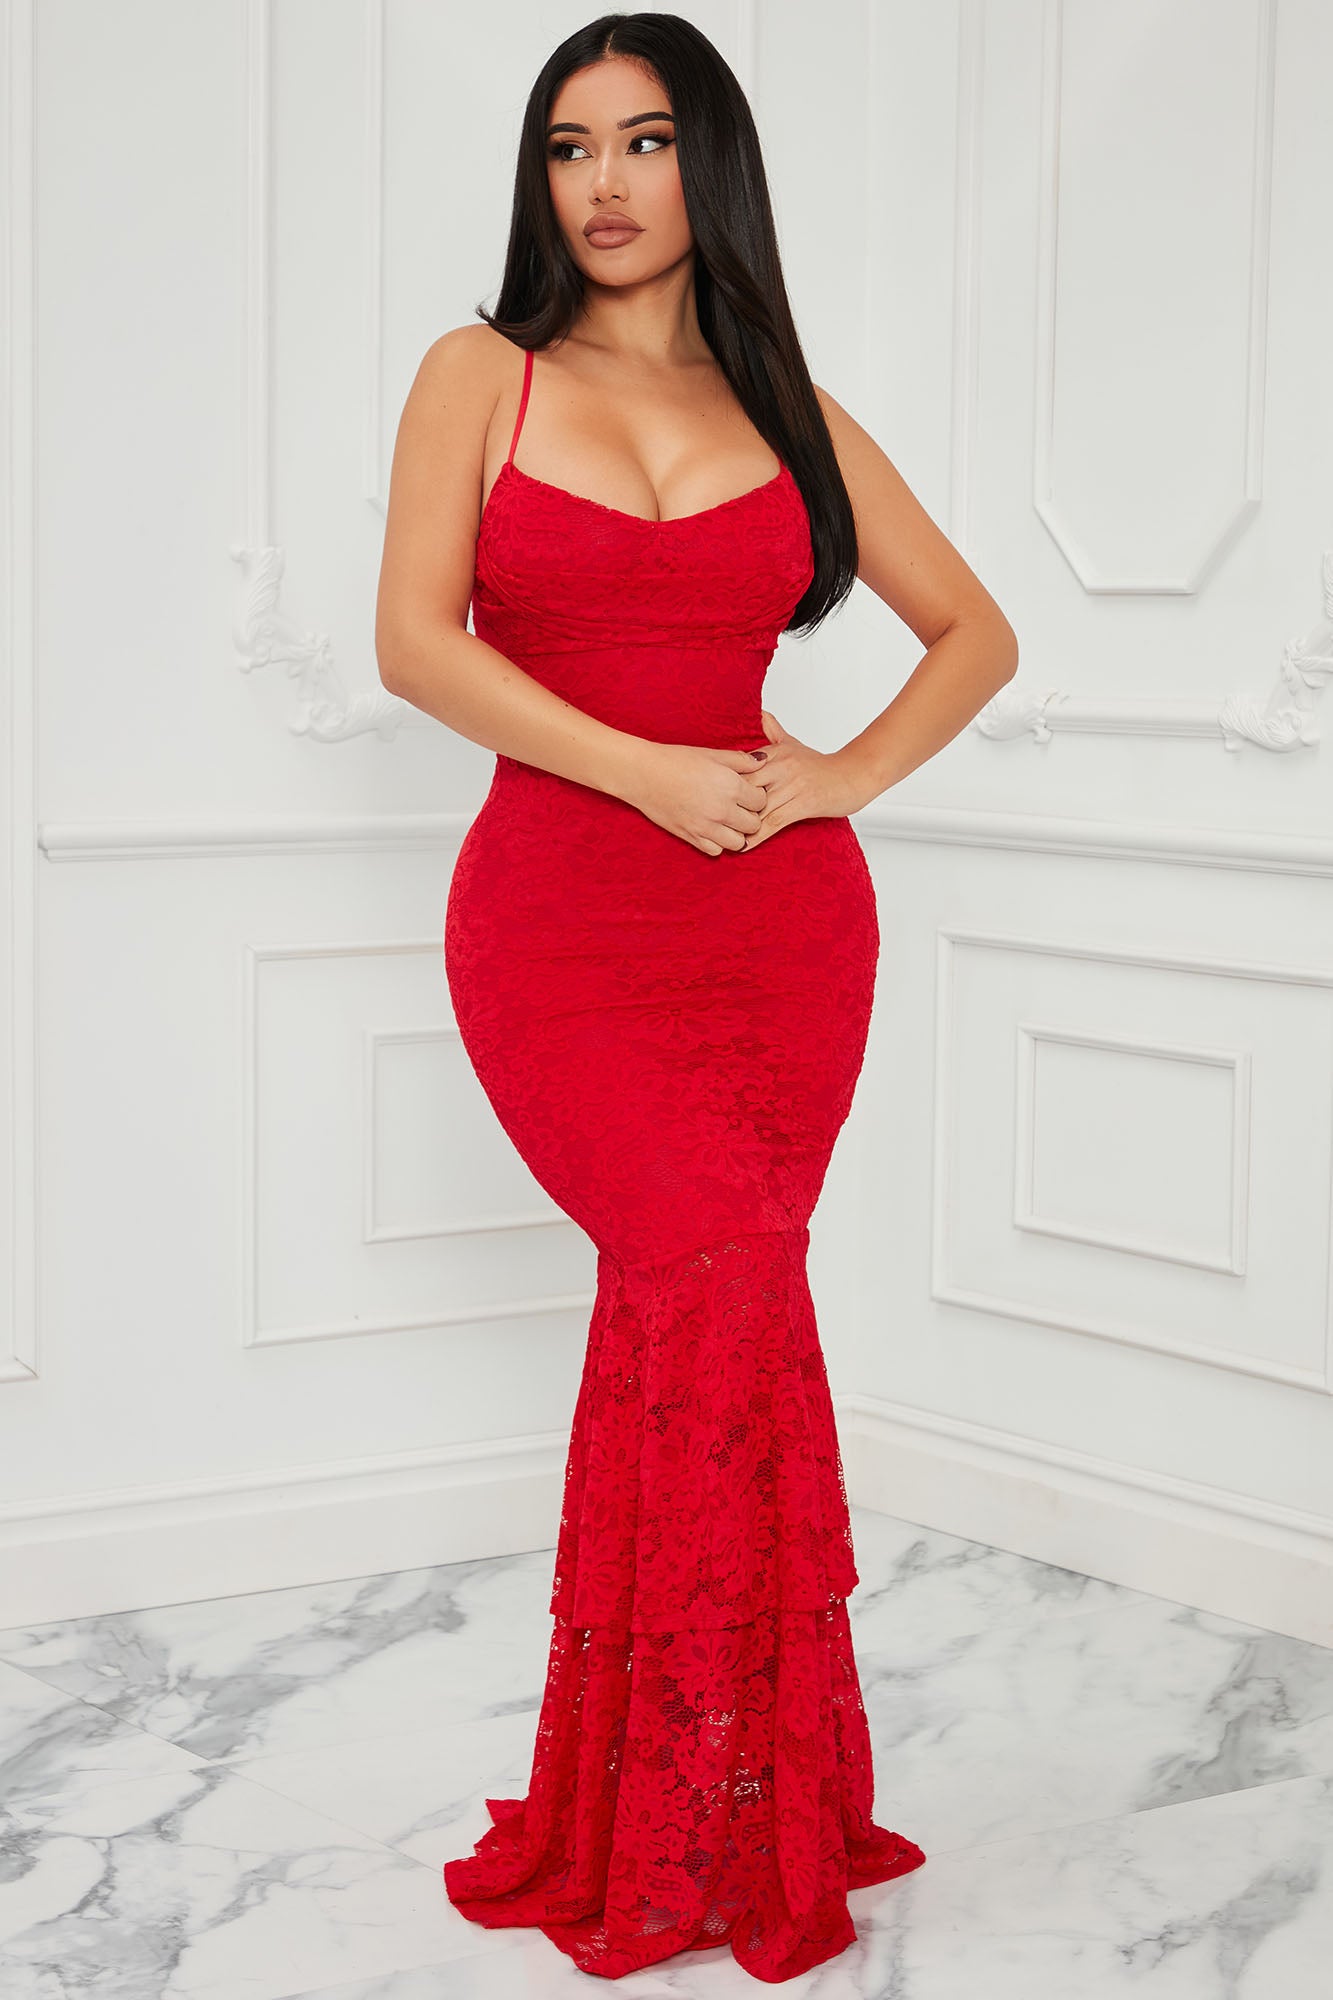 Tiered Sleeveless Lace Cowl Neck, Elegant Maxi Dress in Red, Size M, for Bridesmaid or Prom & Homecoming | Fashion Nova